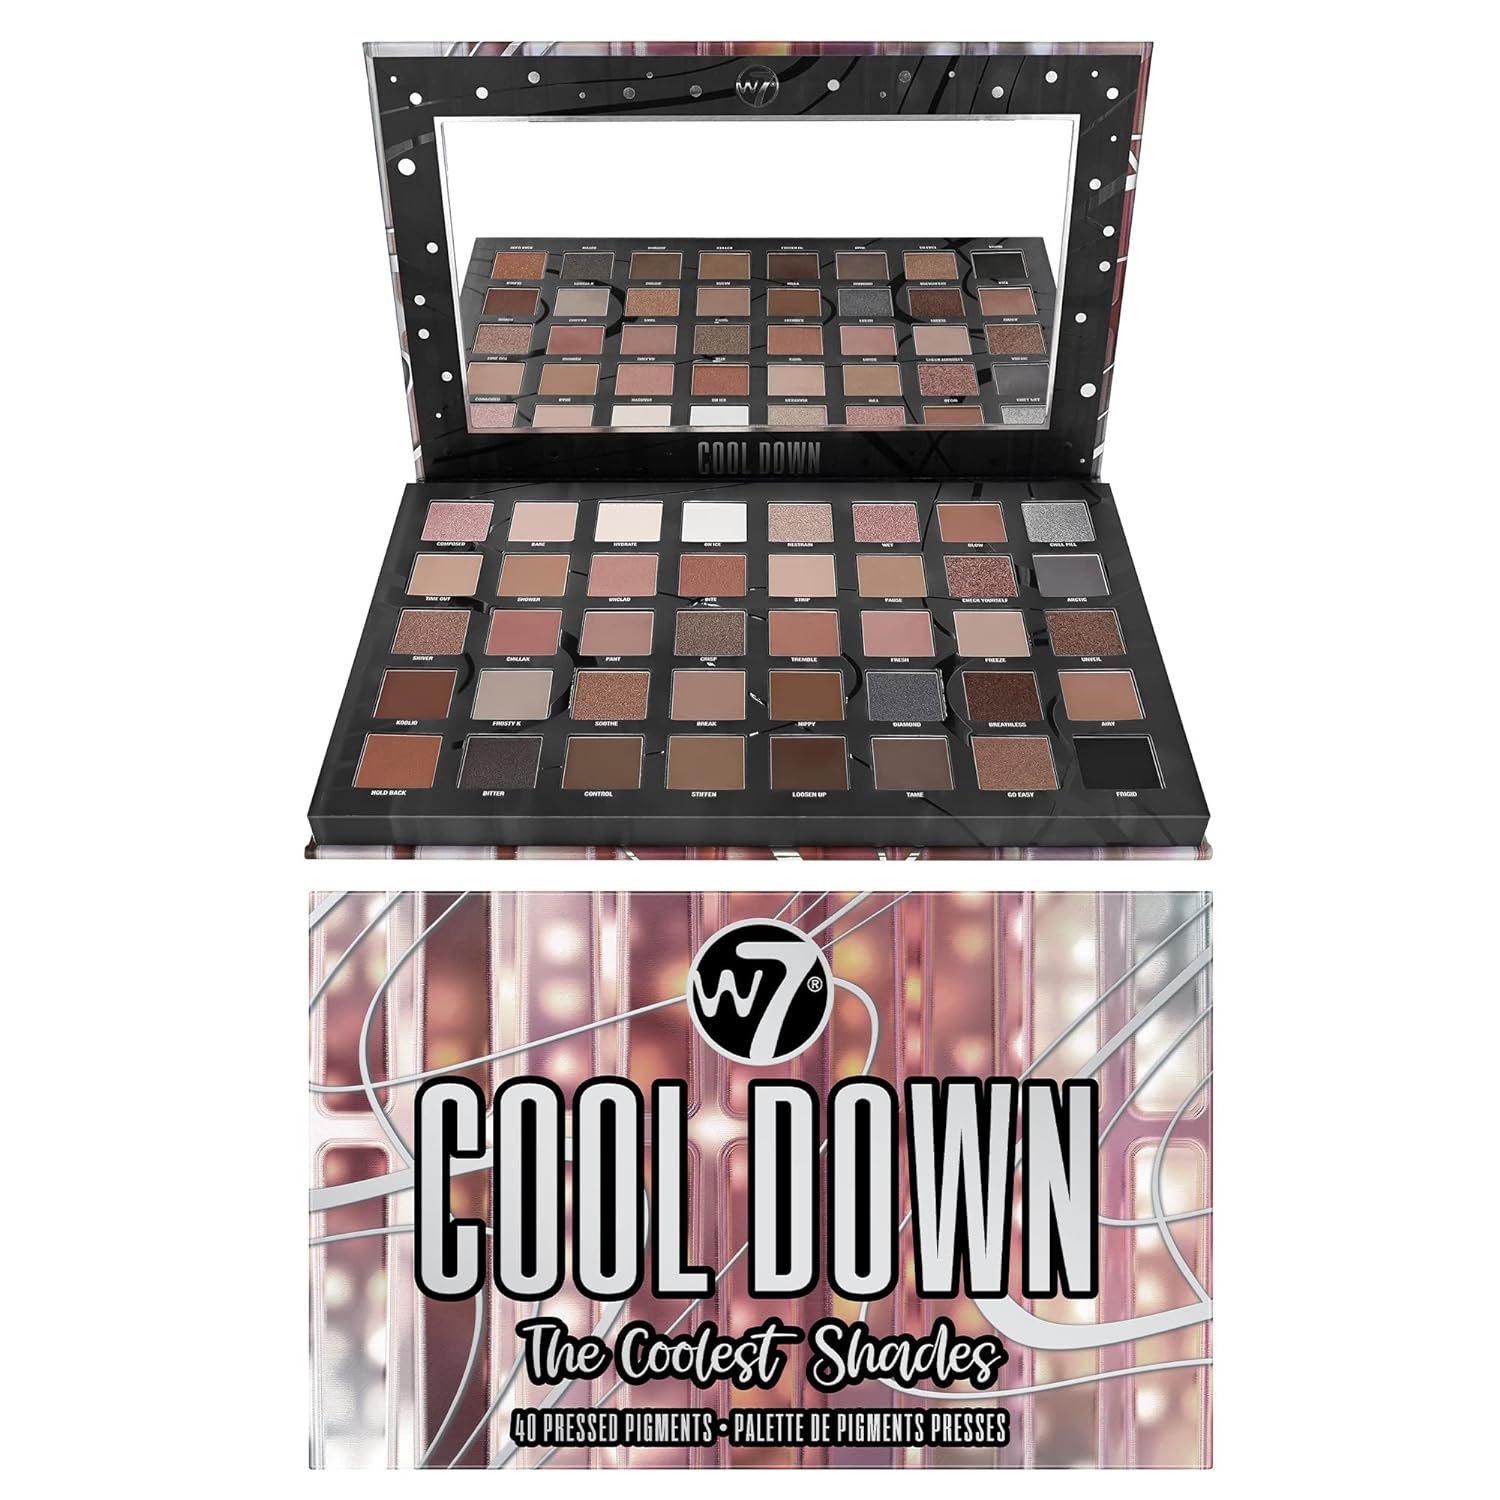 W7 Cool Down Pressed Pigment Palette - 40 High Impact Cool Tone Colors - Flawless Long-Lasting Glam Makeup